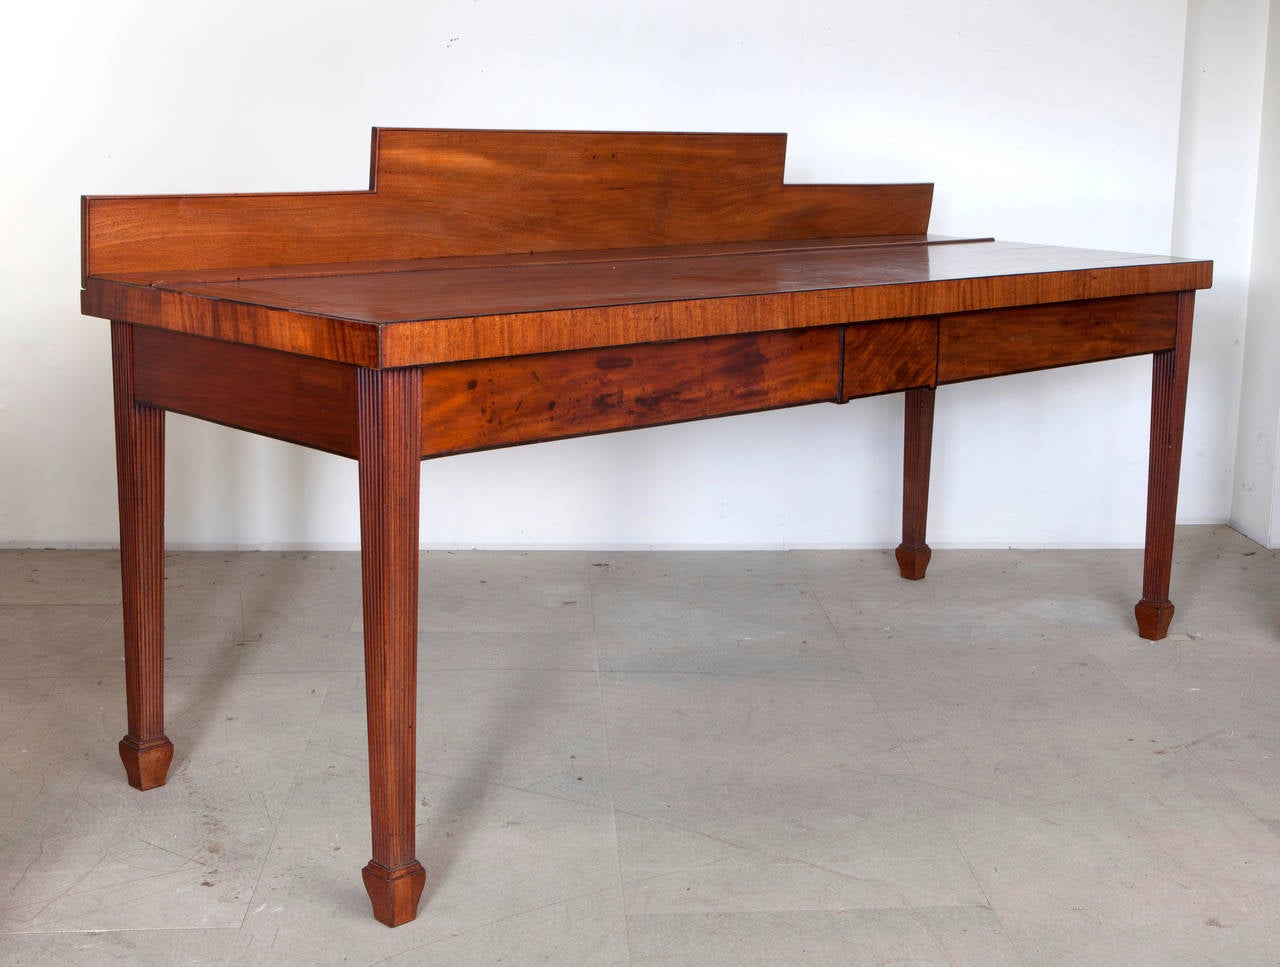 A superb pair of Mahogany Wine Coolers and Serving Table

A superb pair of Mahogany Wine Coolers and Serving Table made for Knocklofty House, Tipperary, Ireland, for Richard Healy, later Earl of Donoughmore English c 1810 

Measuring: Wine